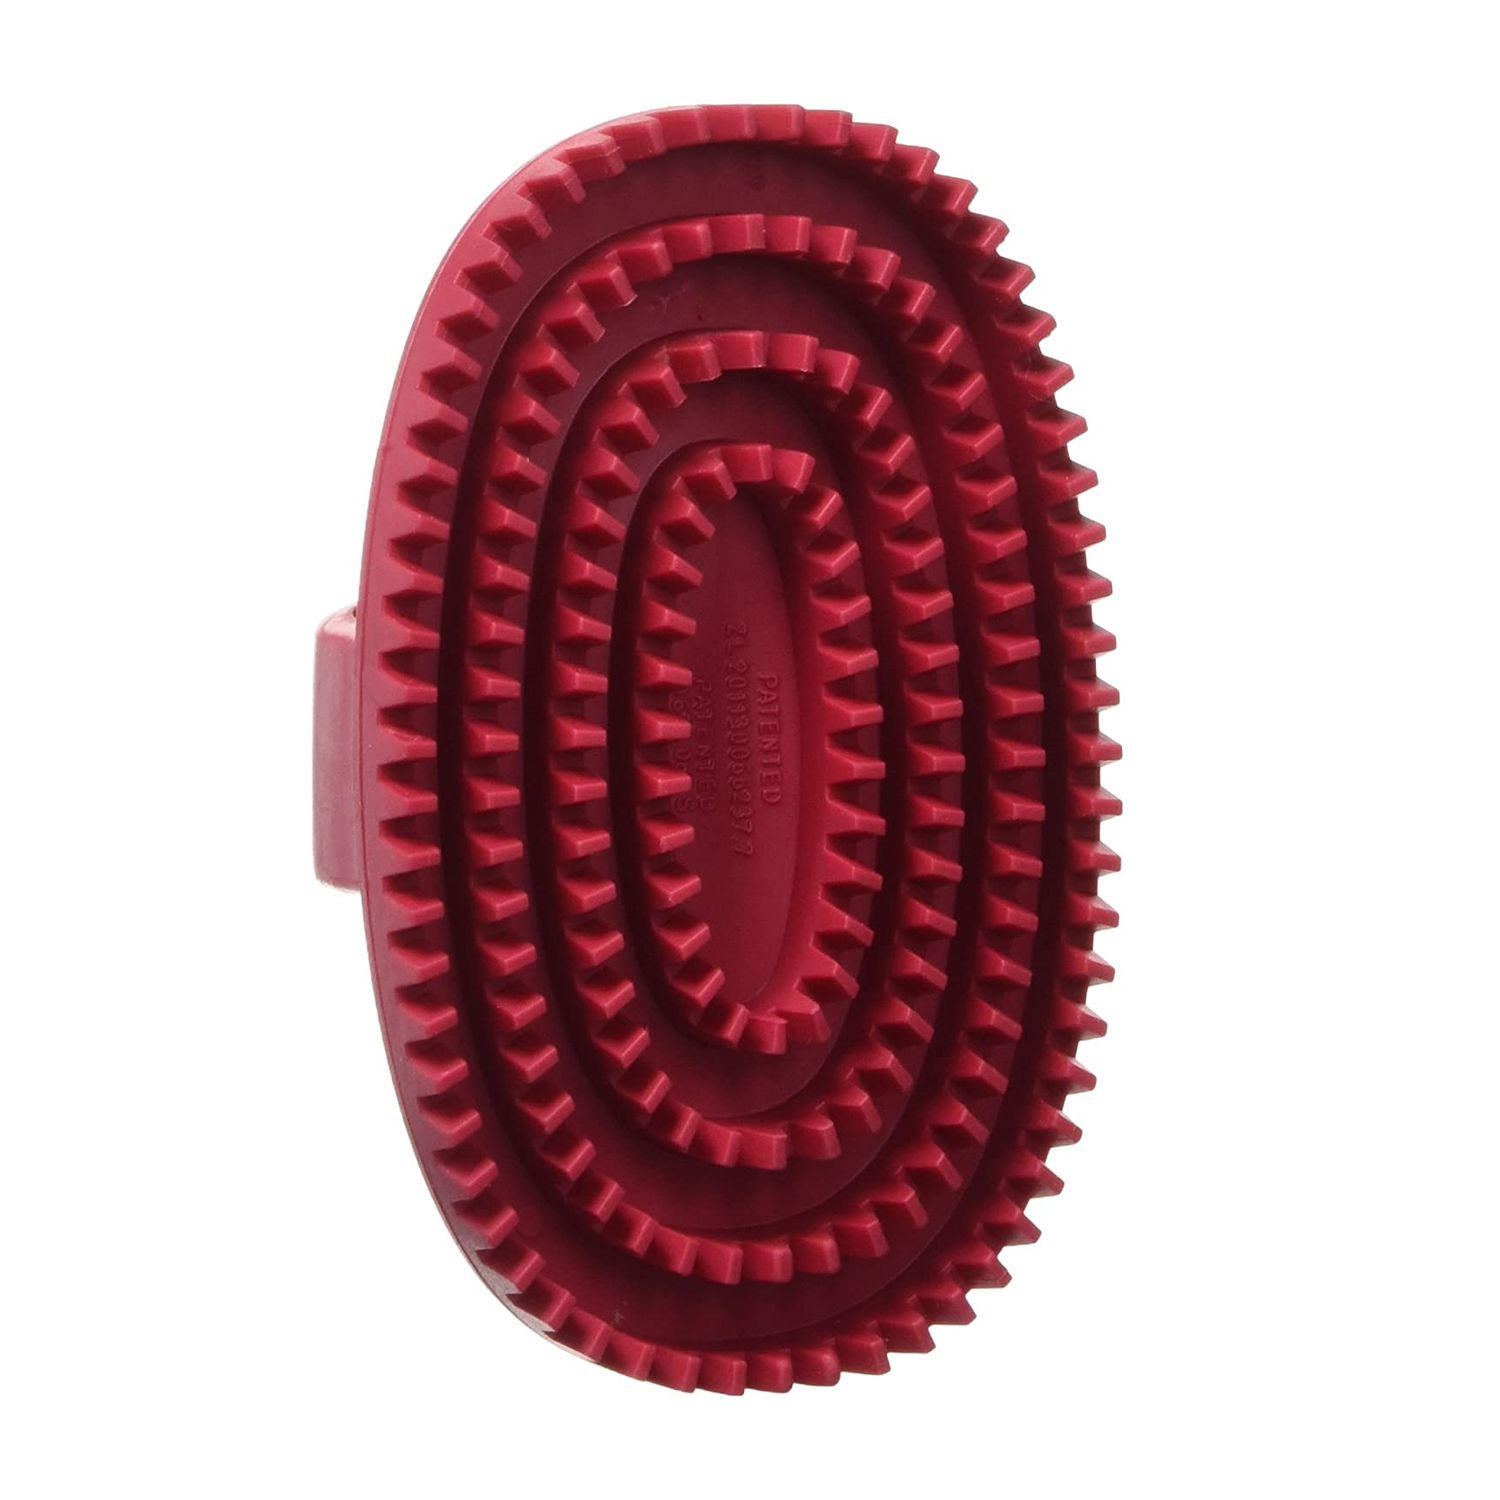 le-salon-essentials-rubber-curry-grooming-brush